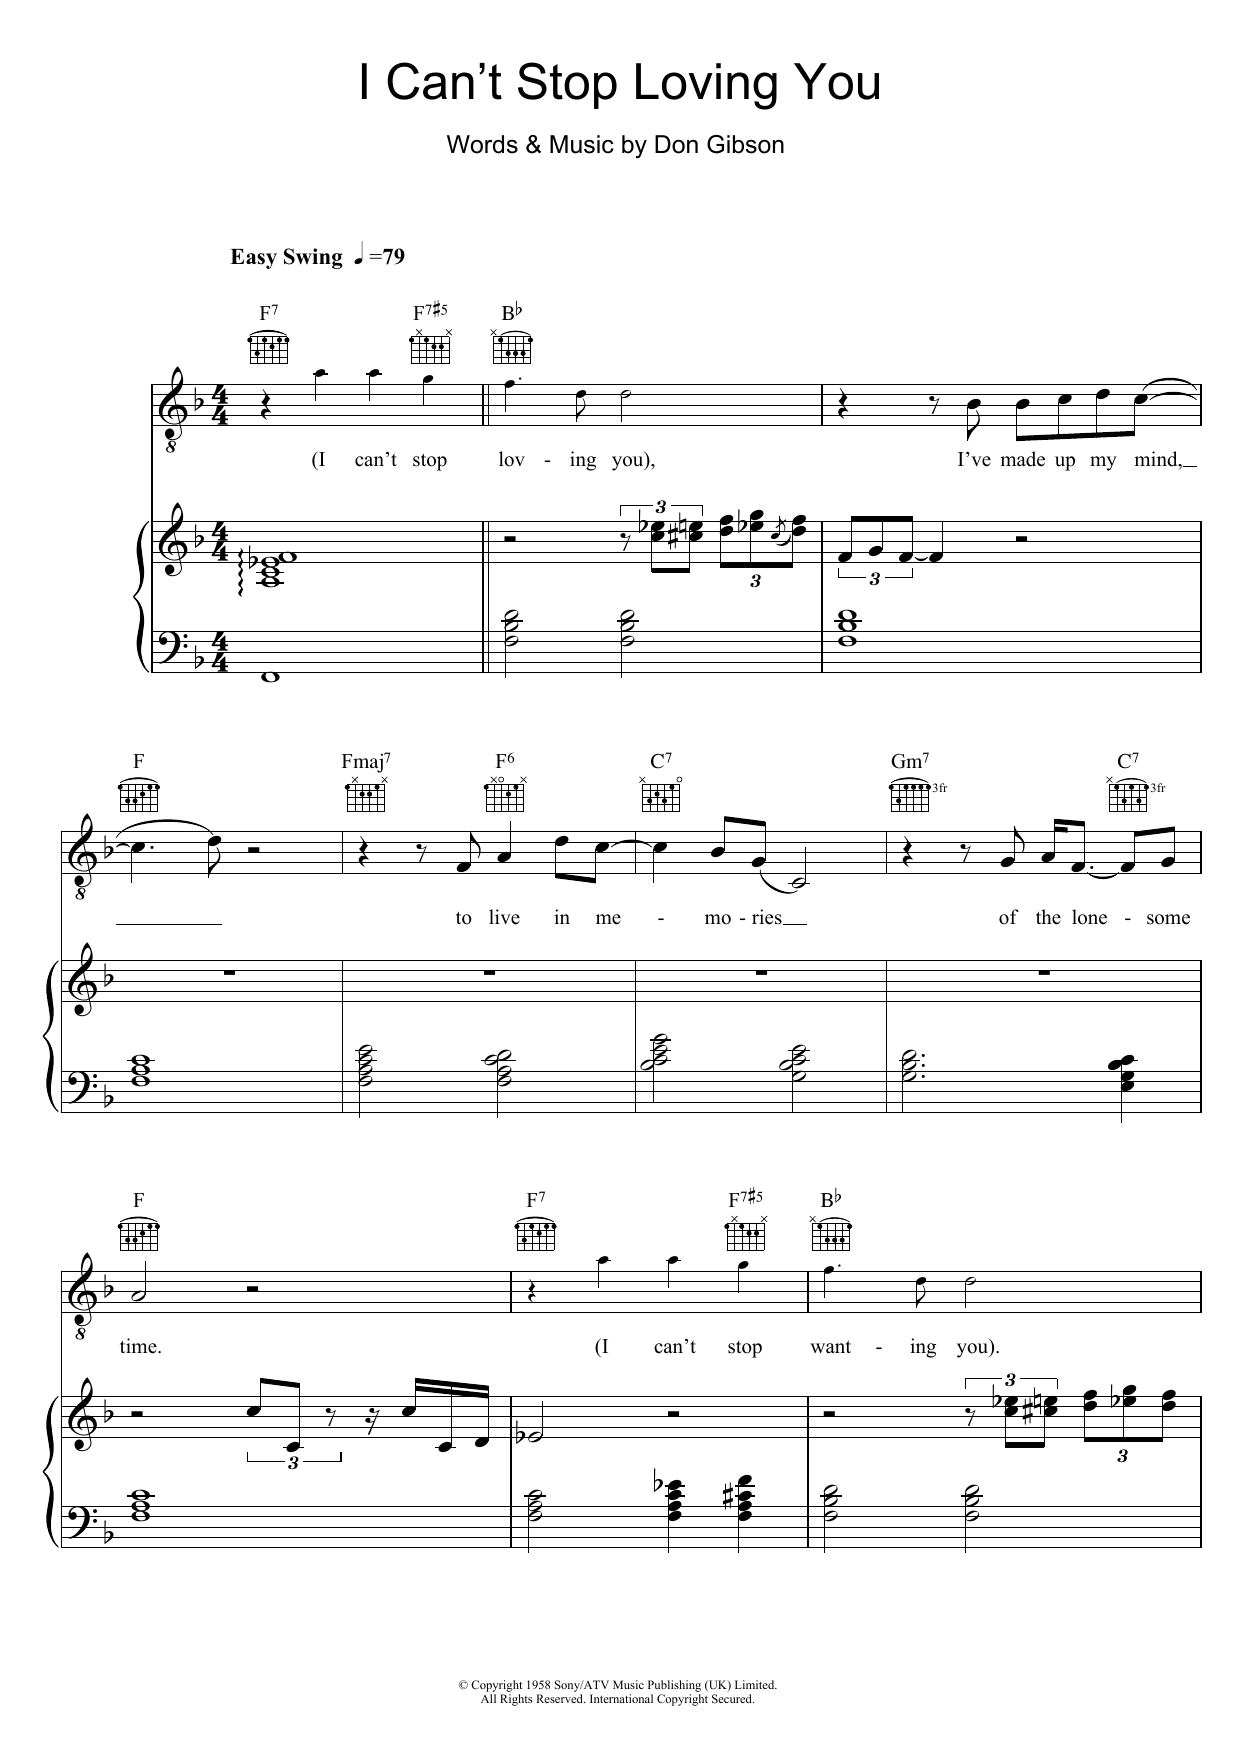 Download Ray Charles I Can't Stop Loving You Sheet Music